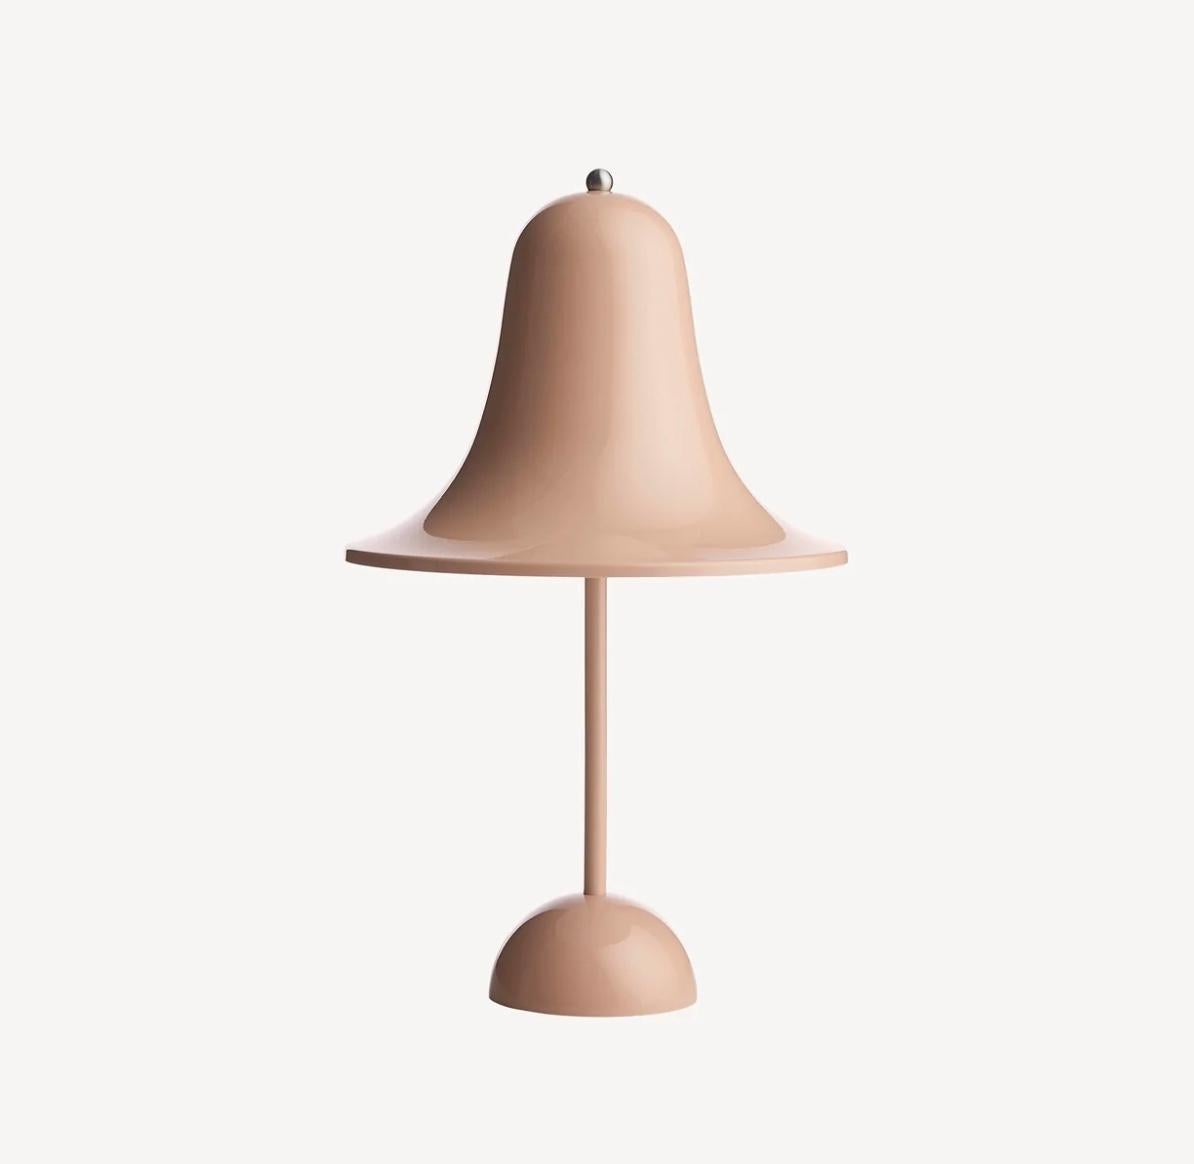 Verner Panton 'Pantop Portable' table lamp in 'Dusty Rose' for Verpan. Designed in 1980. New, current production.

This is a versatile smaller and wireless version of the 'Pantop' table lamp, usb-chargeable. 

The elegant Pantop line was